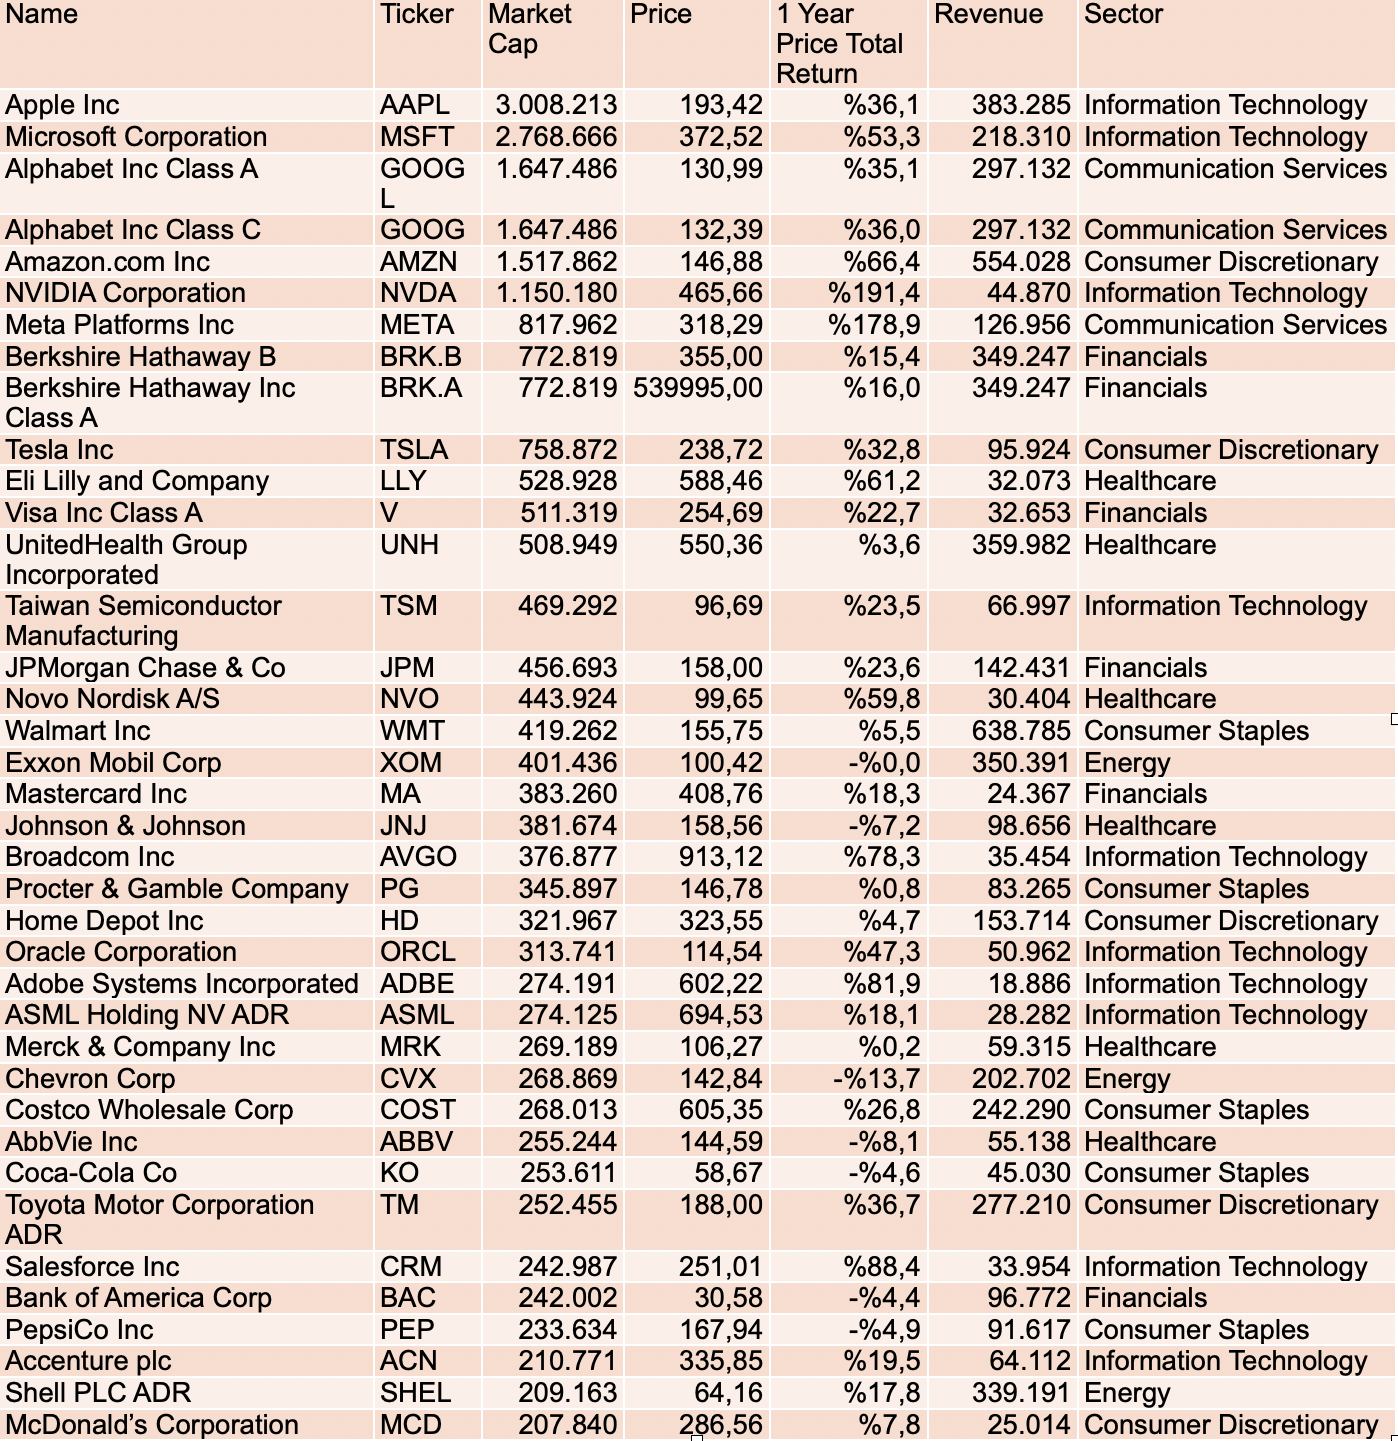 List of 36 Shortlisted Stocks